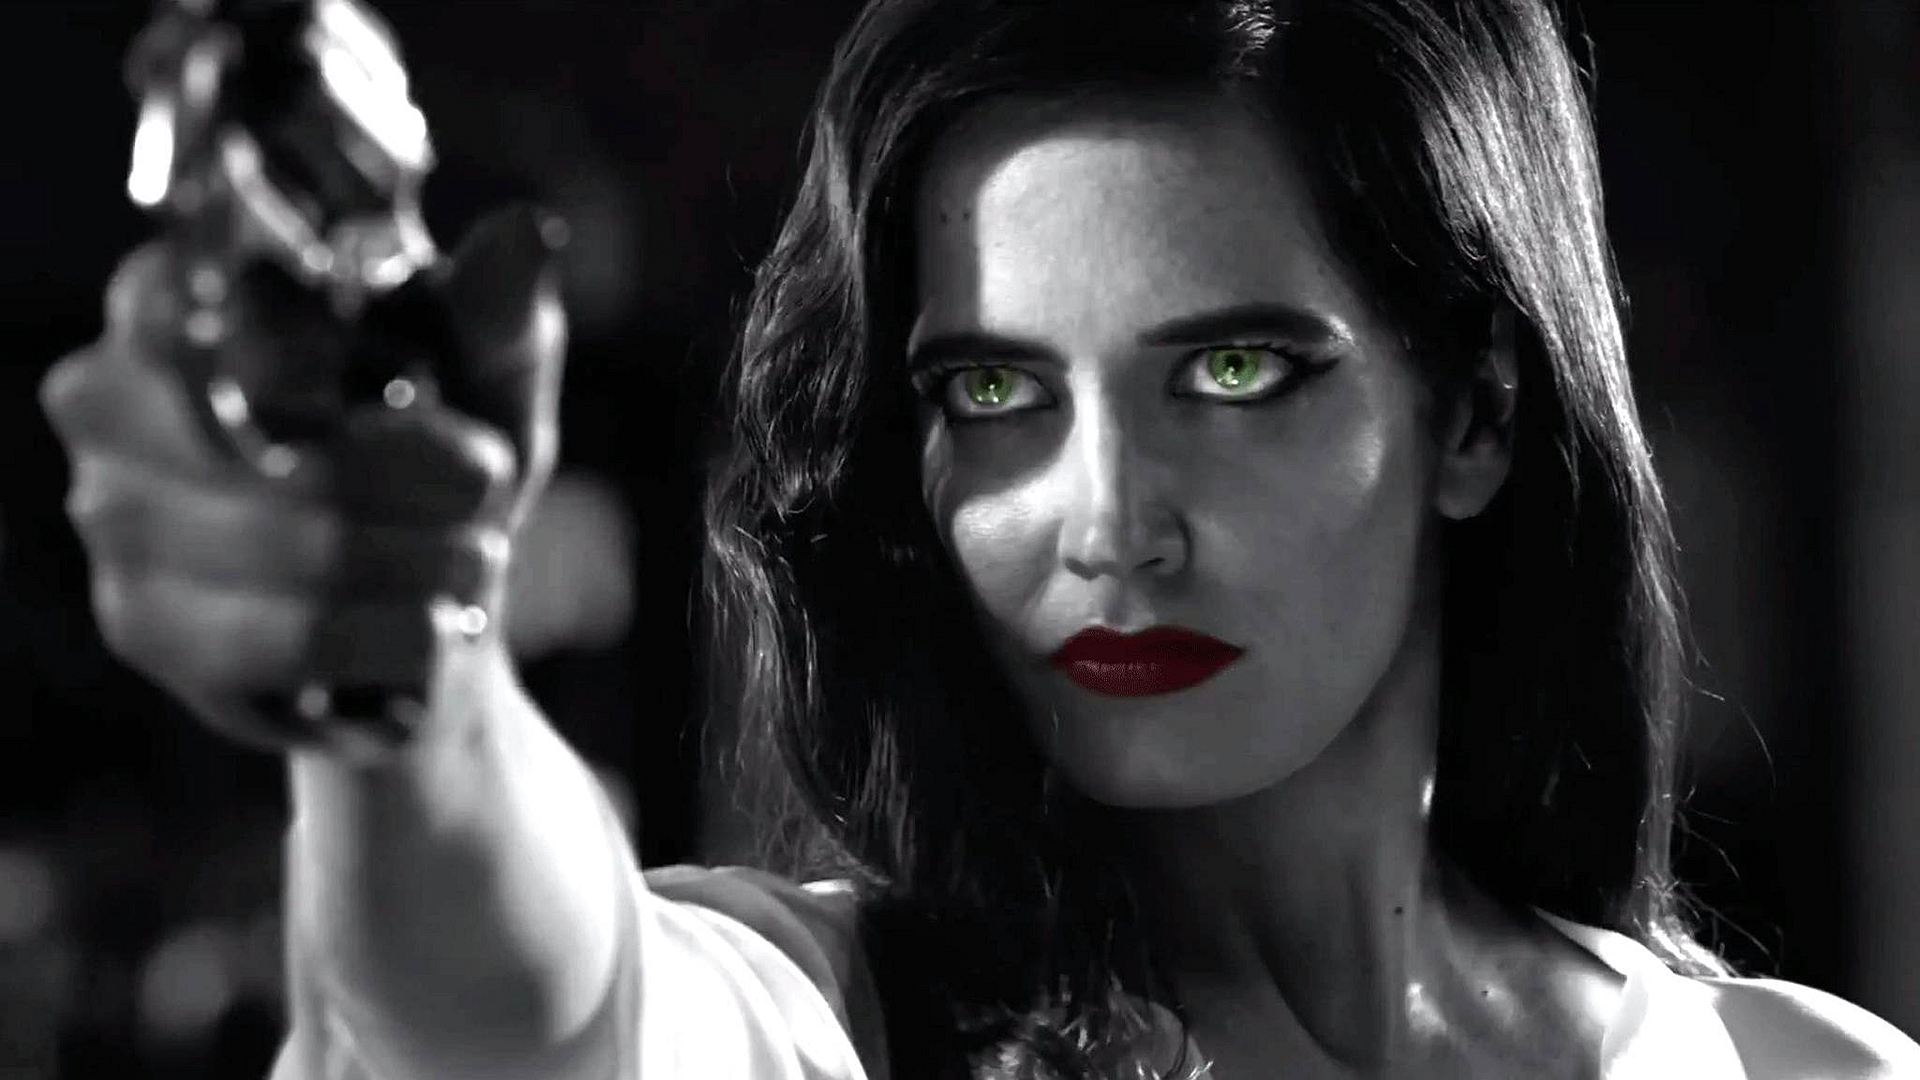 eva green movie latest hd wallpapers - Free hd wallpapers